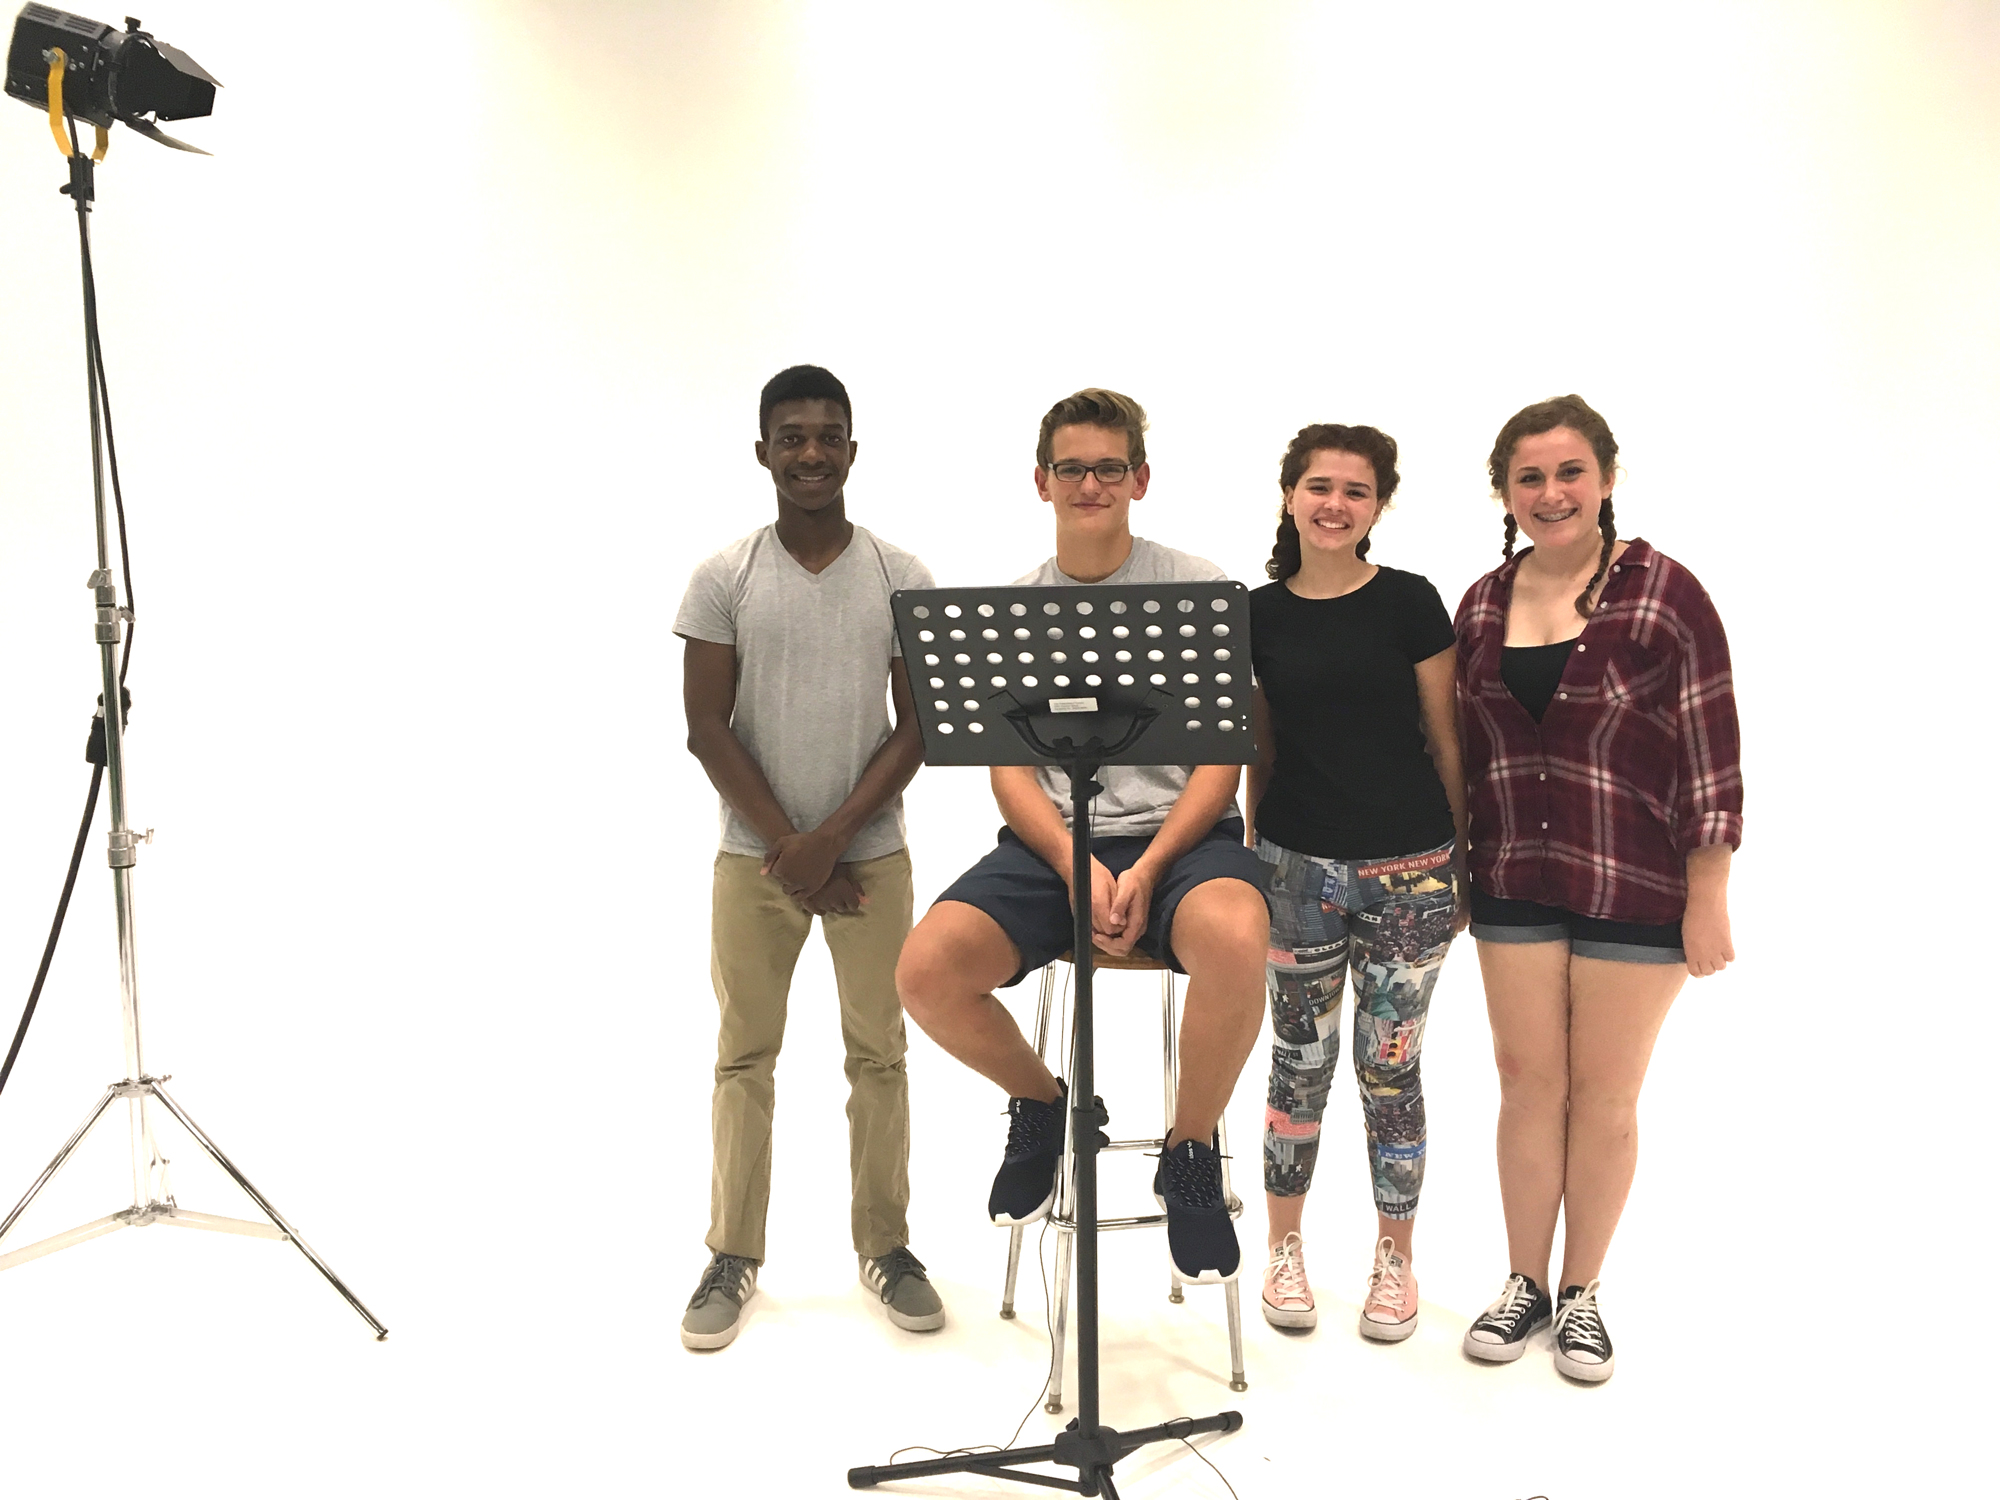 Sarasota students Nick Blake, Connor Andritch, Minnah Stein, and Emma Knego record voiceovers for the national educational video 